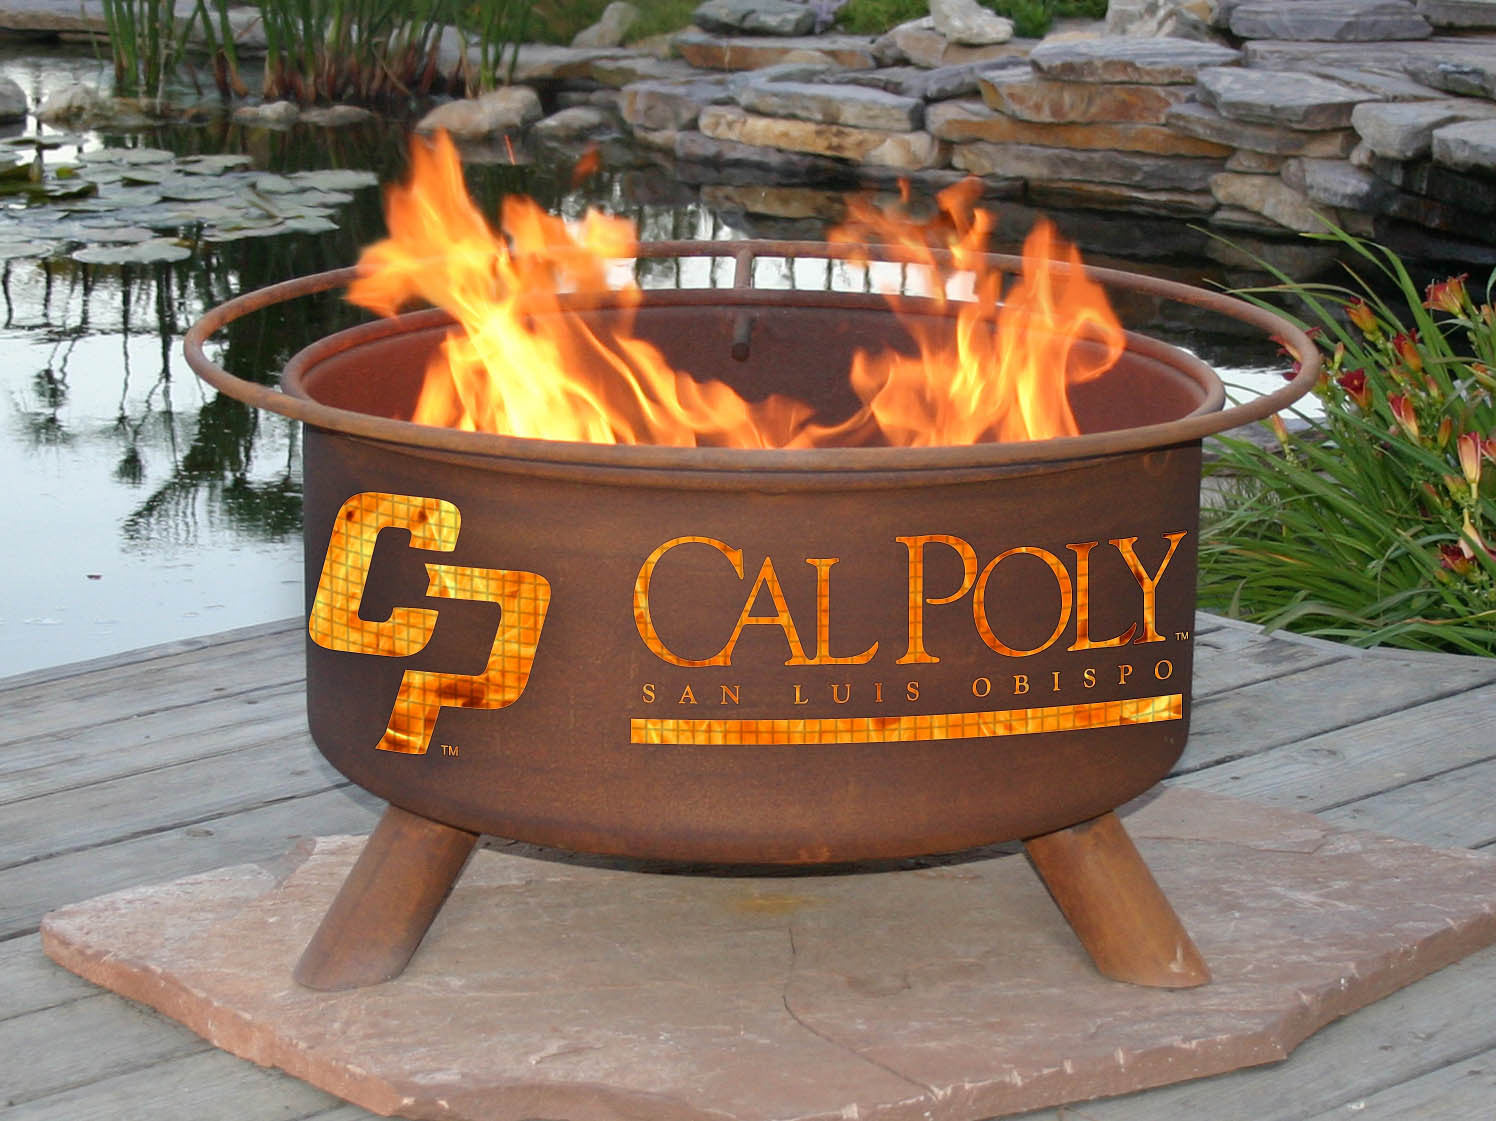 Collegiate Cal Poly San Luis Obispo Logo Wood and Charcoal Steel Fire Pit, Fireplace - Yardify.com